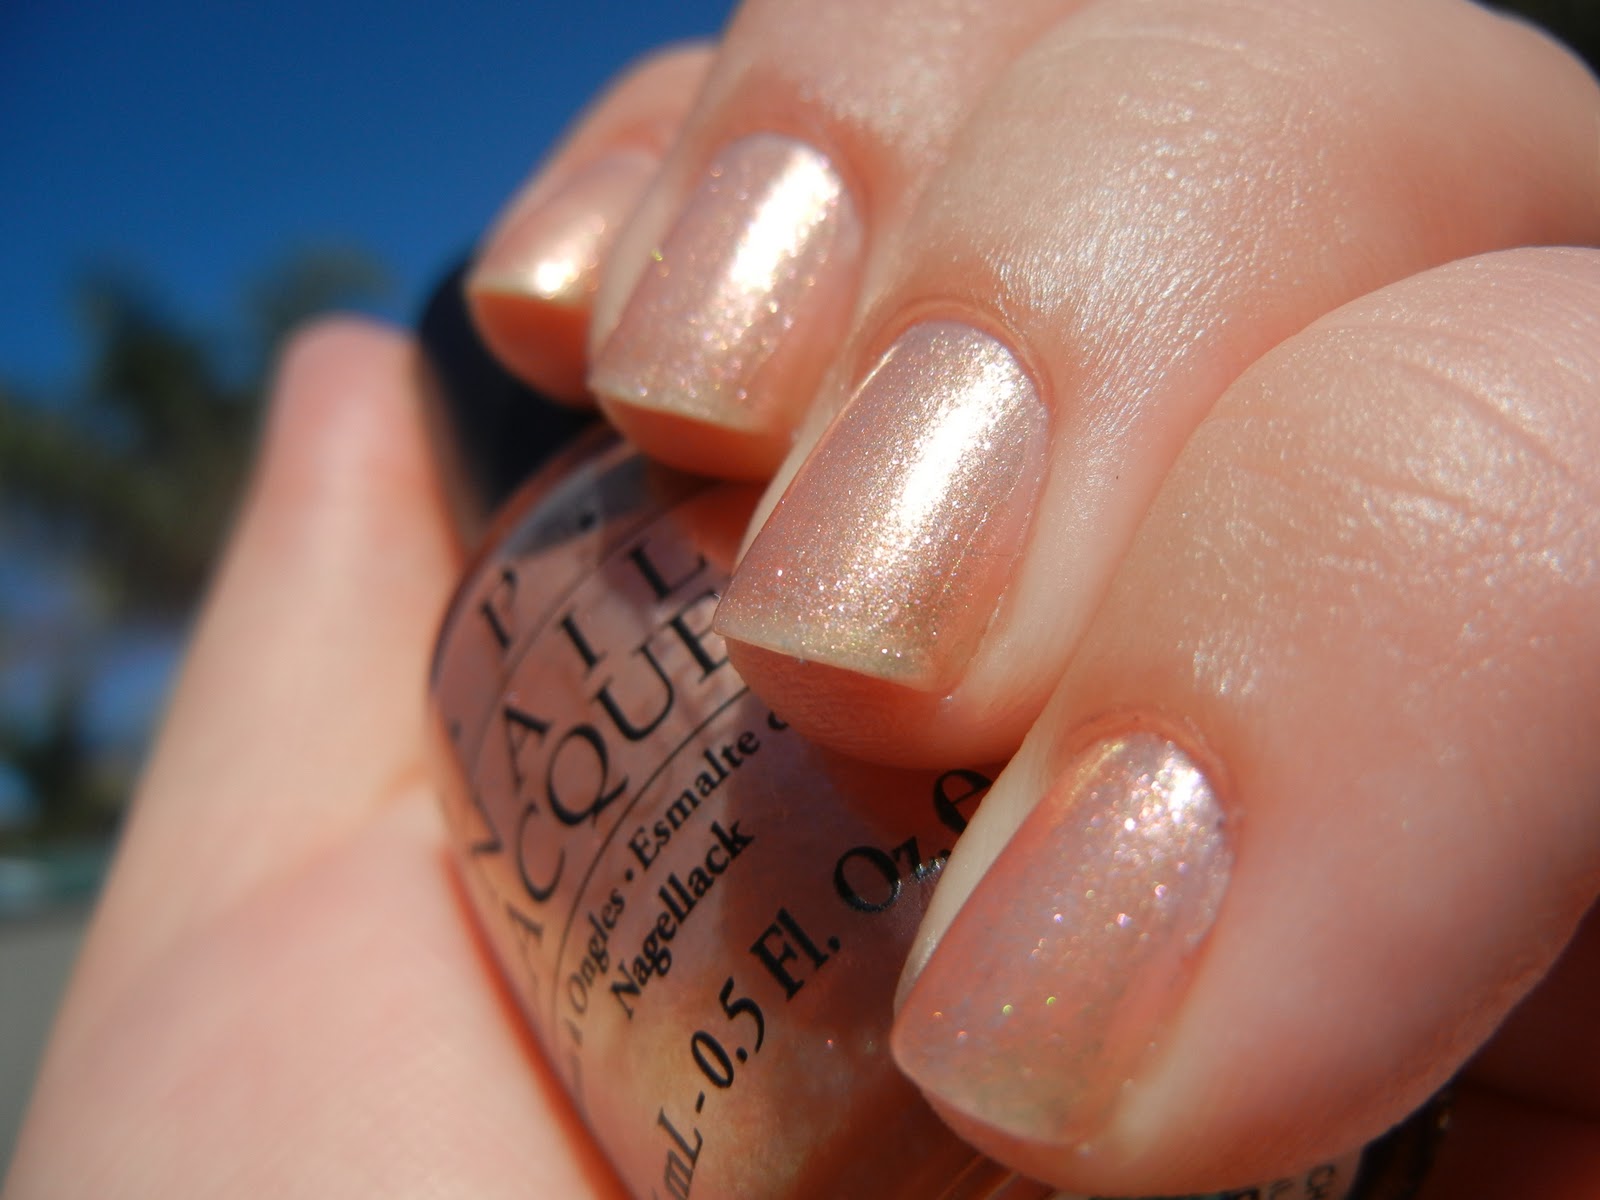 1. OPI Nail Lacquer in "Peach-a-Boo!" - wide 1